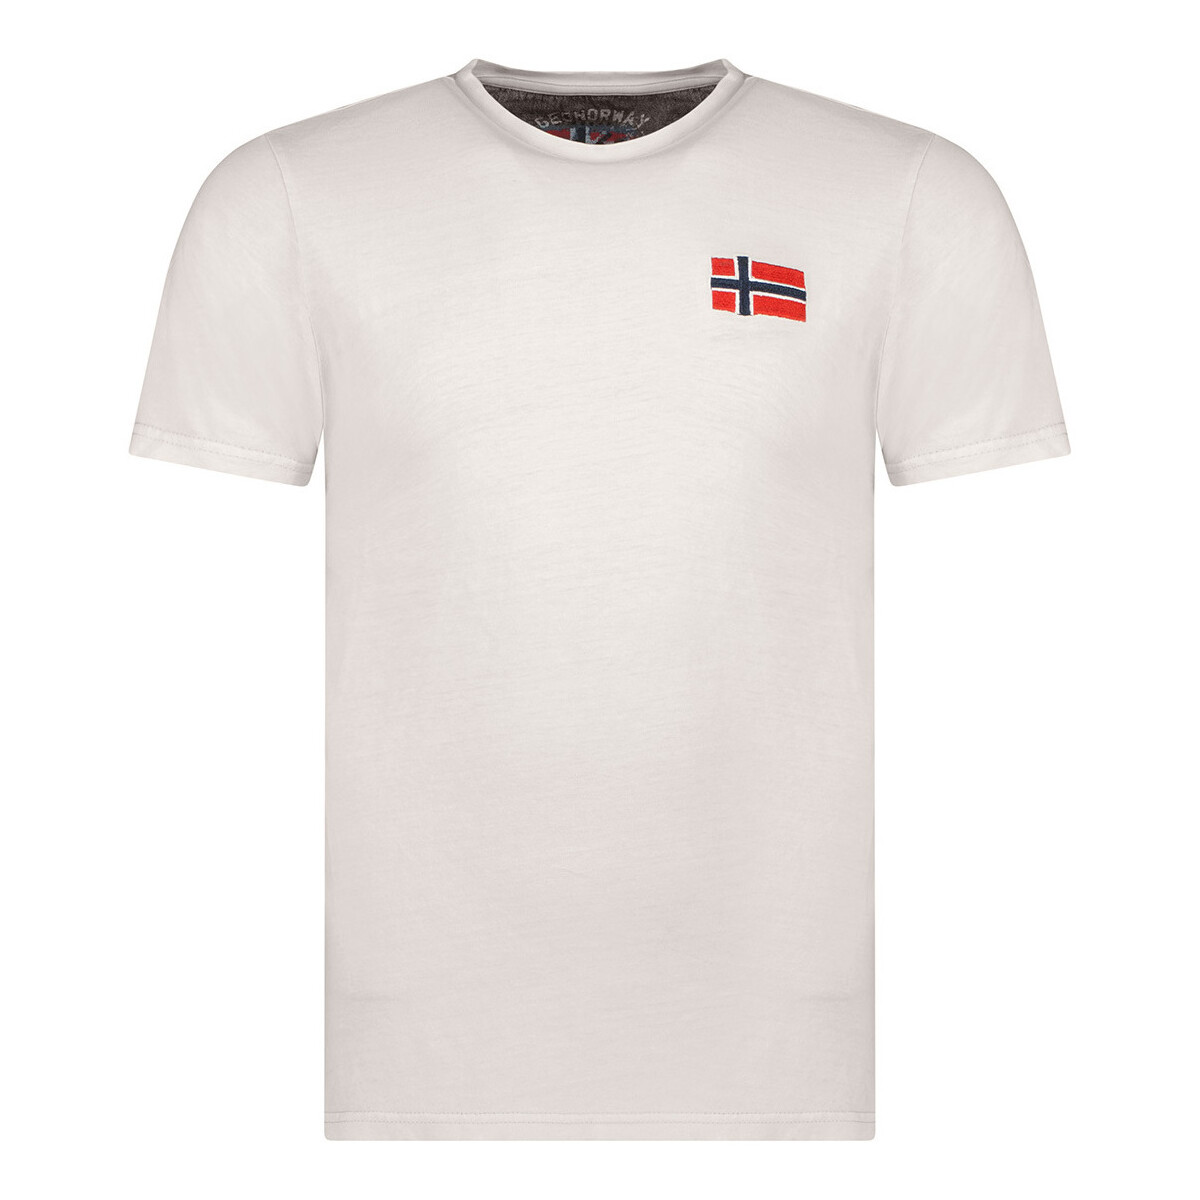 Vêtements Homme T-shirts manches courtes Geographical Norway SW1269HGNO-LIGHT GREY Gris